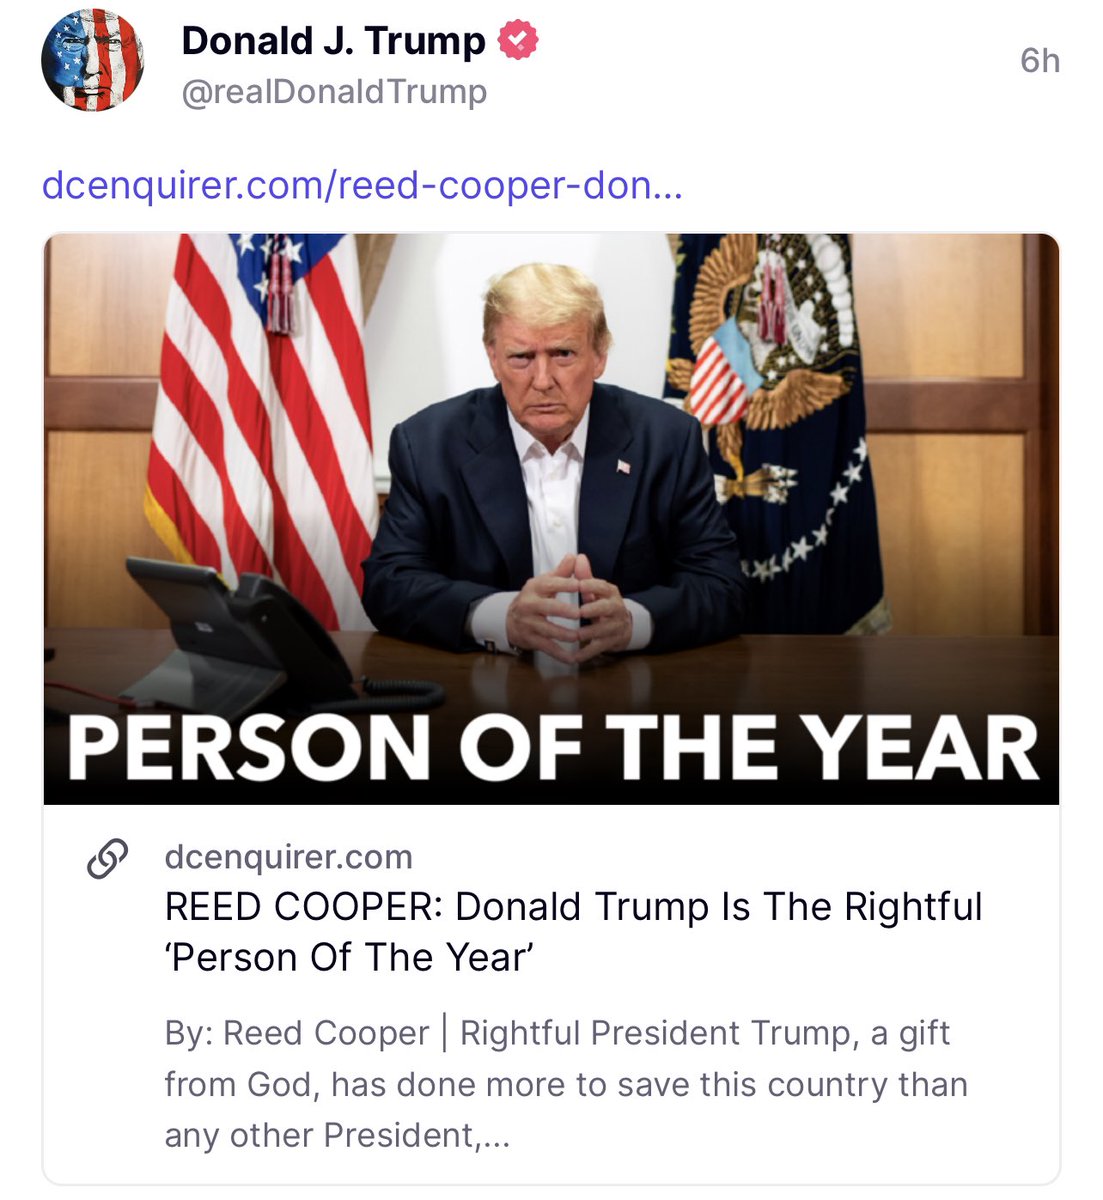 Thank you, Rightful President Trump, for sharing my article a second time today! President Trump is the RIGHTFUL 'Person of the Year' due to his takedown of child & human trafficking. God bless this gift from heaven.